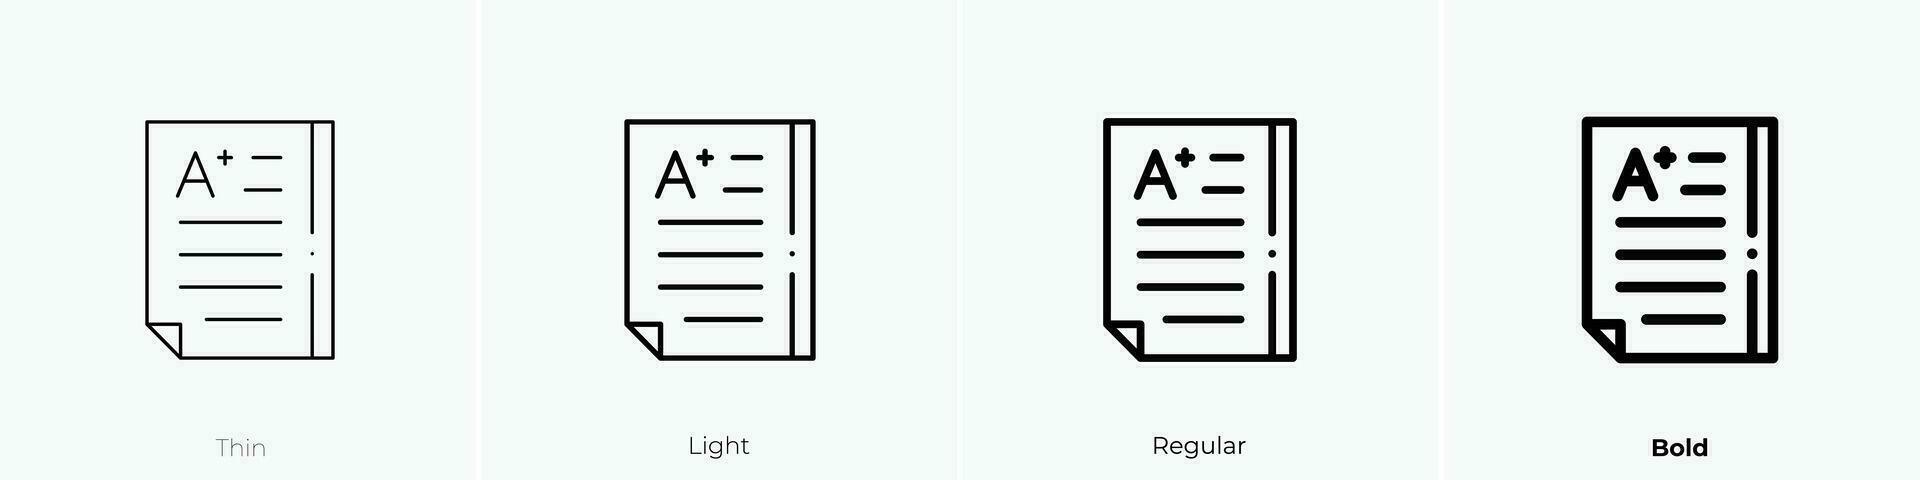 test icon. Thin, Light, Regular And Bold style design isolated on white background vector